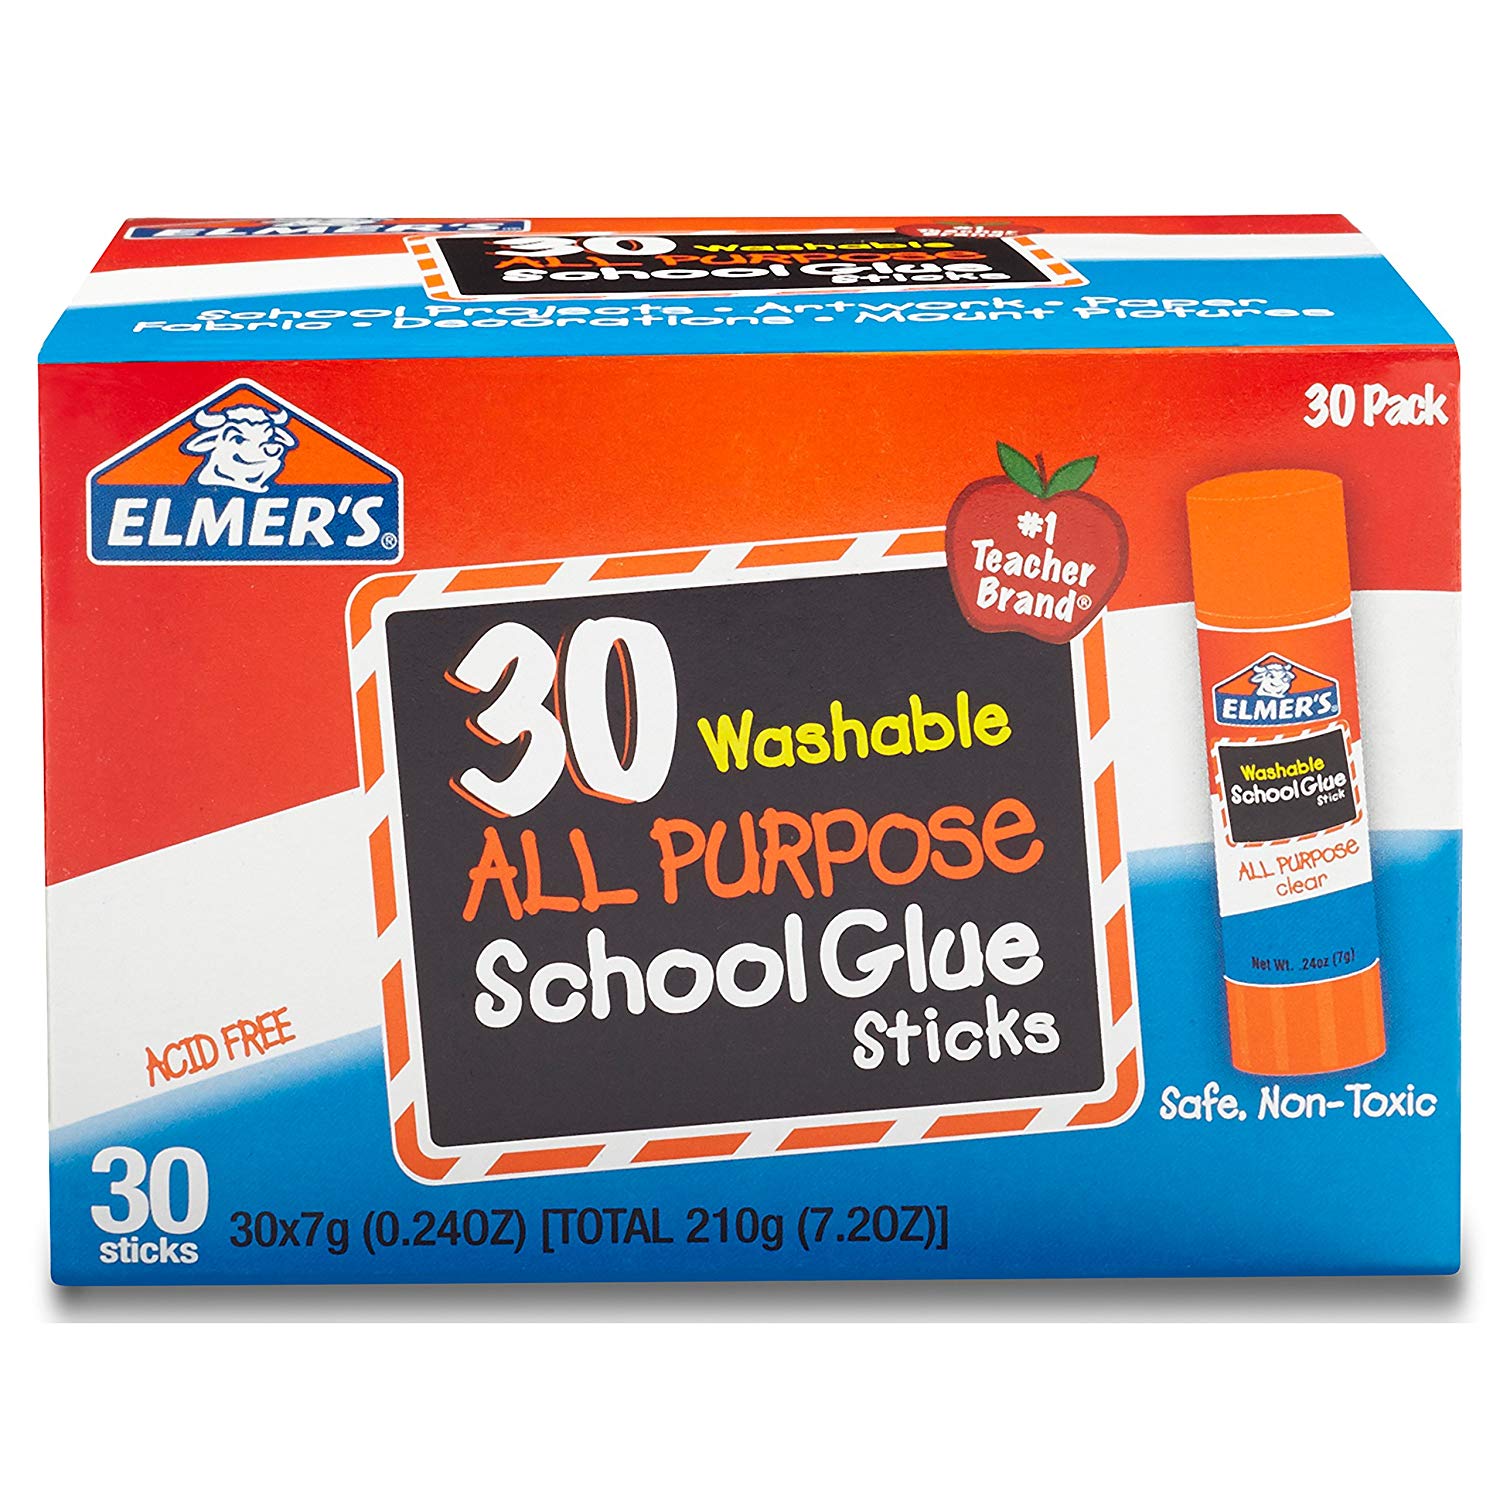 Elmer’s All Purpose School Glue Sticks, Washable, 30 Pack – Just $10.00! $.33 each! Back to school!